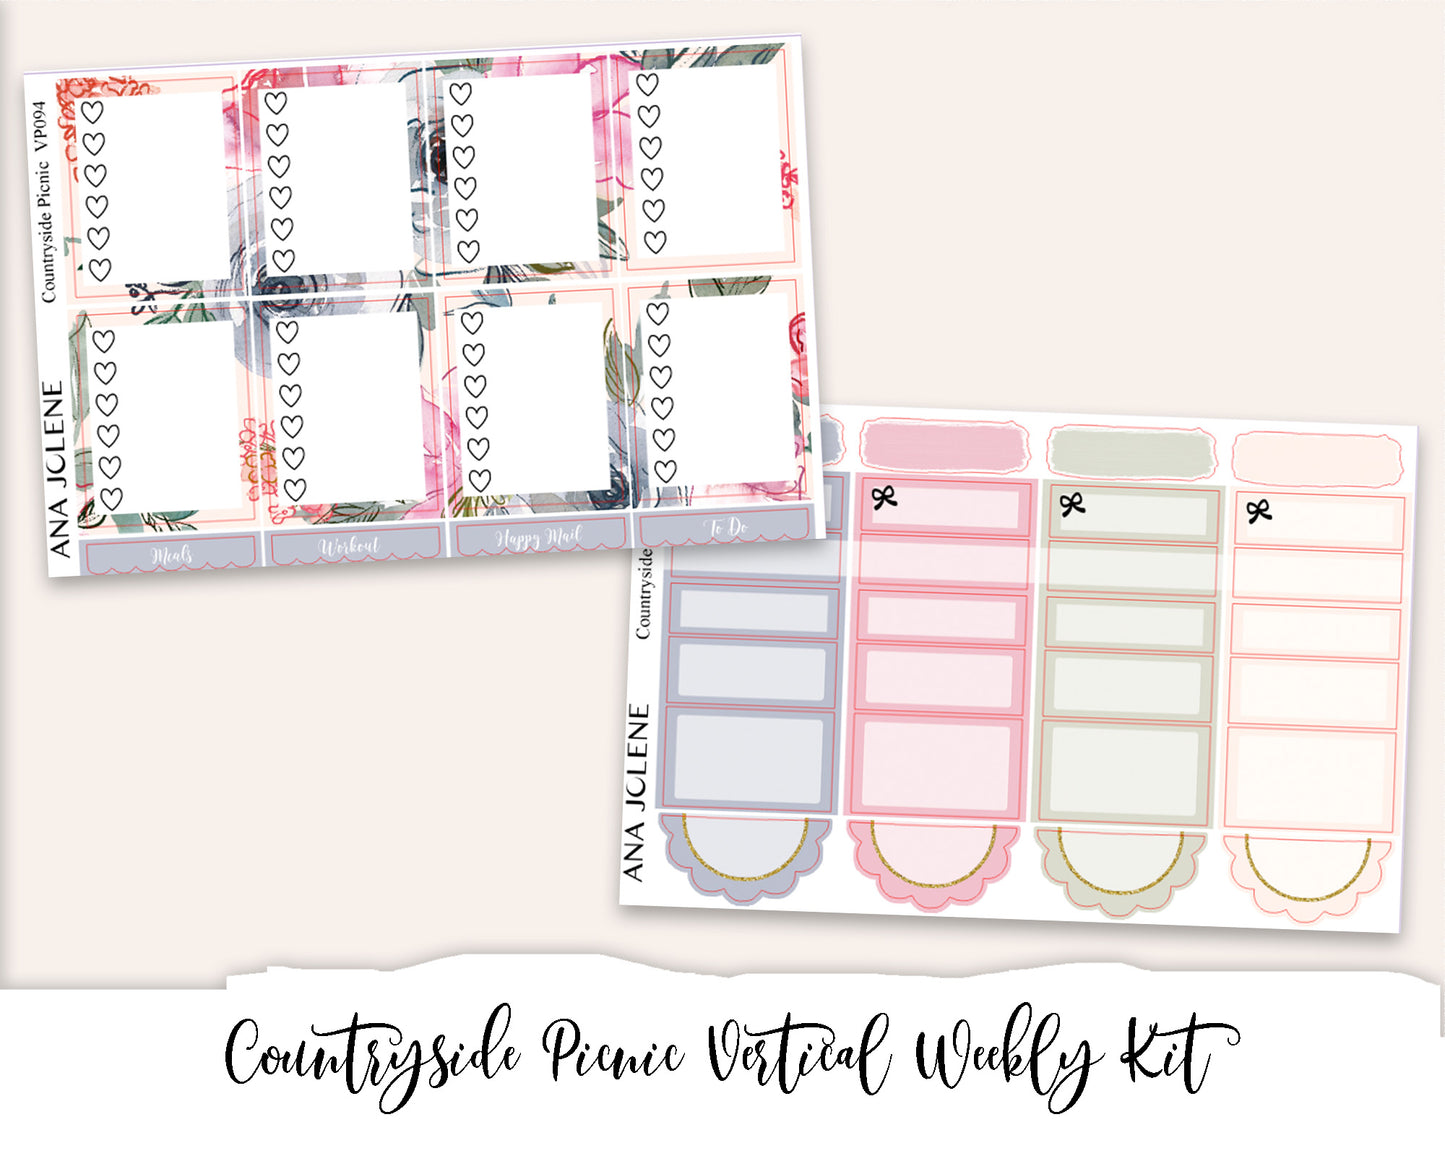 COUNTRYSIDE PICNIC Planner Sticker Kit (Vertical Weekly)